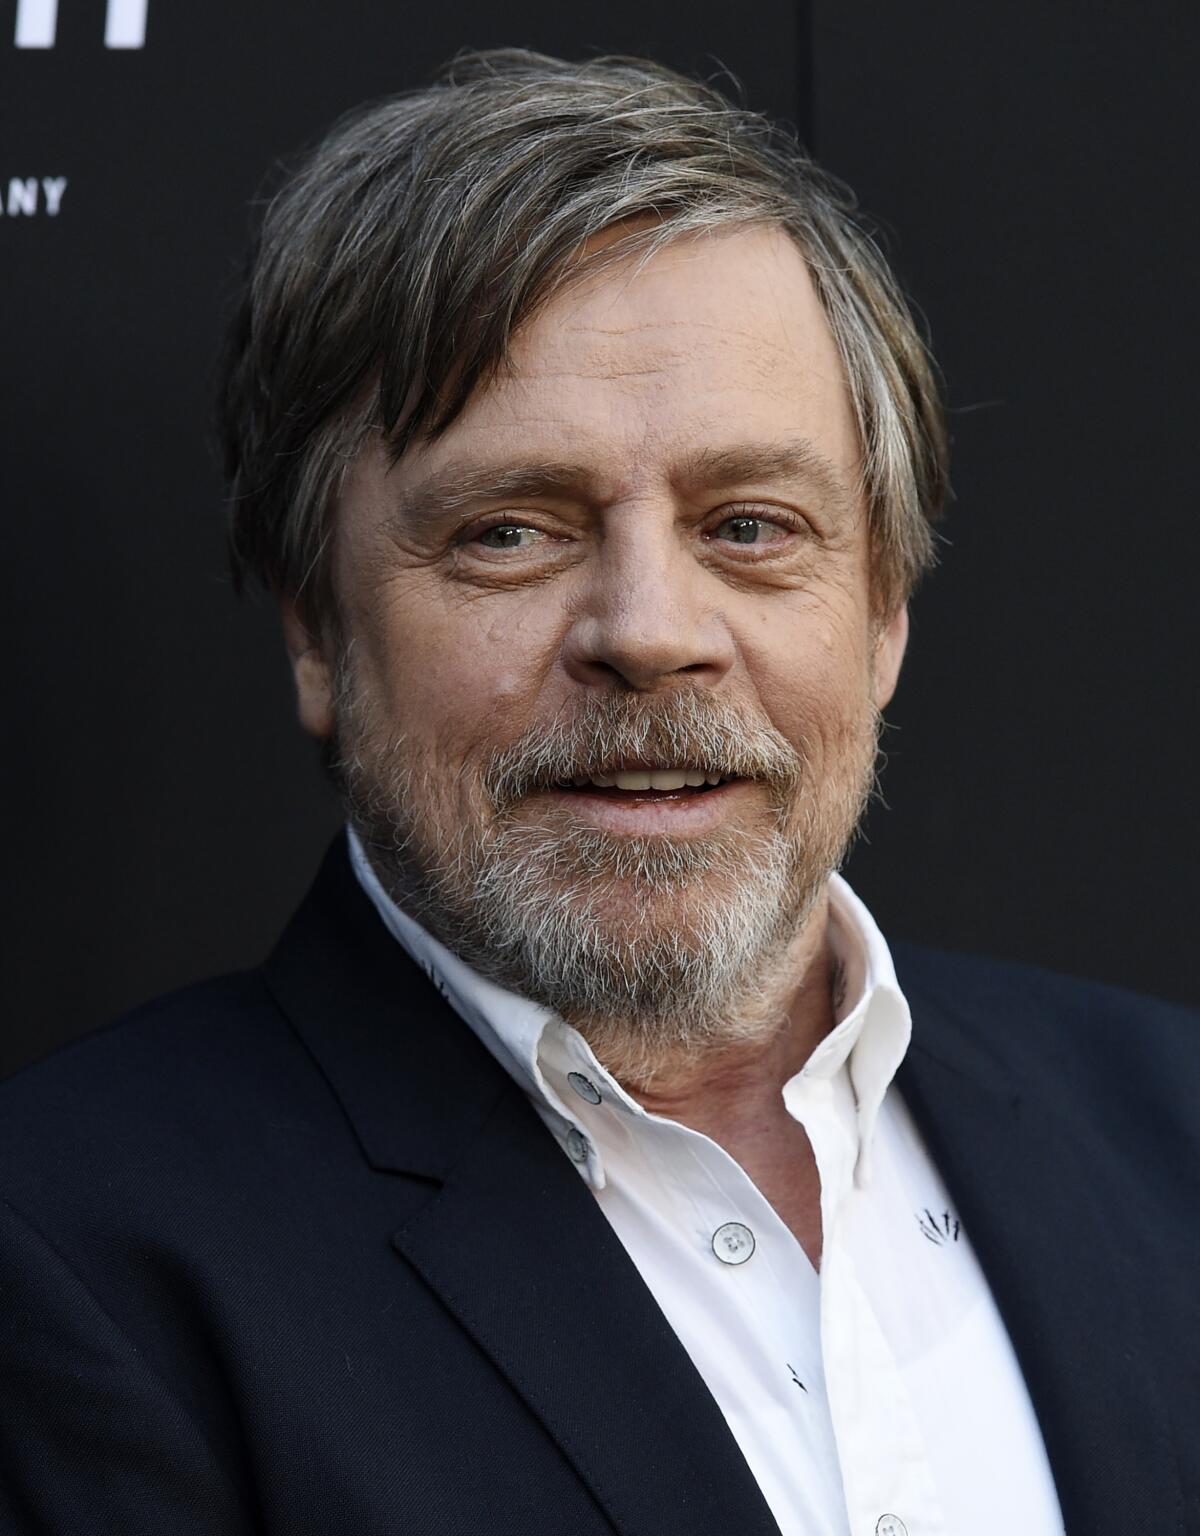 Mark Hamill, cast member "Child's play," poses at the film's premiere at the ArcLight Hollywood